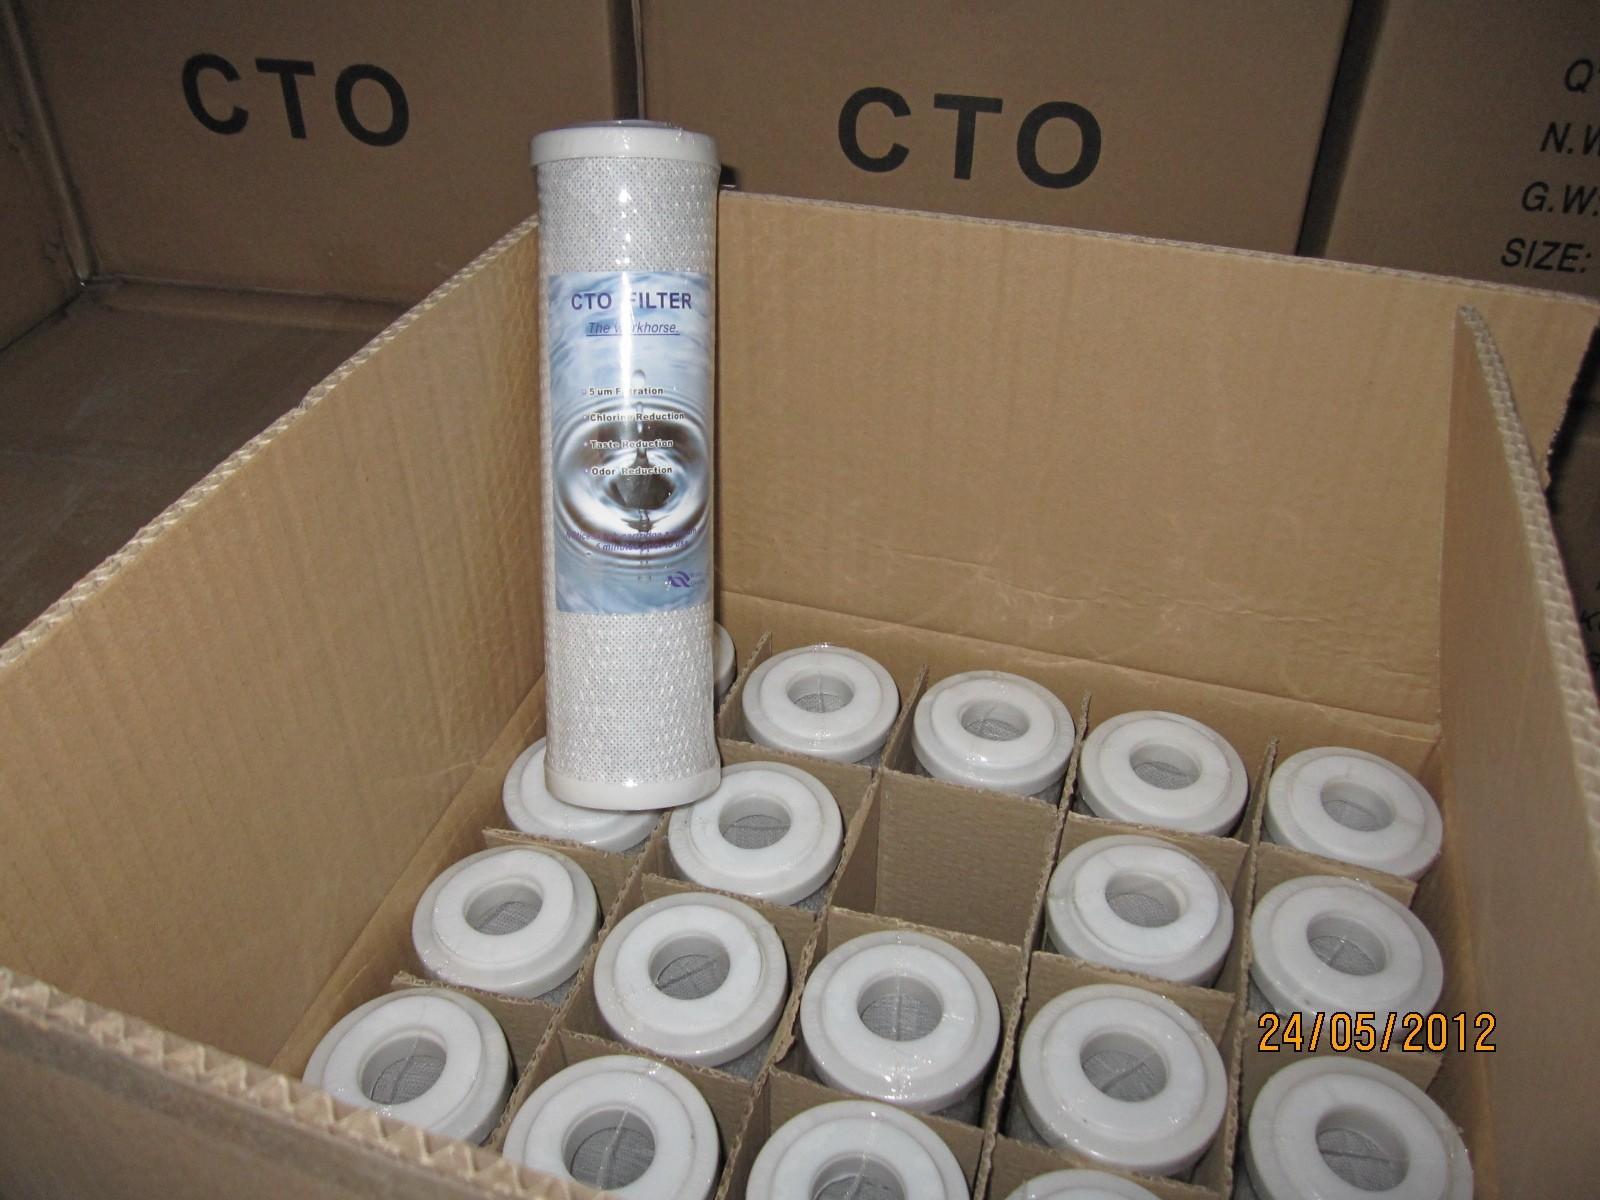 Ocpuritech activated filter cartridges with good price for business